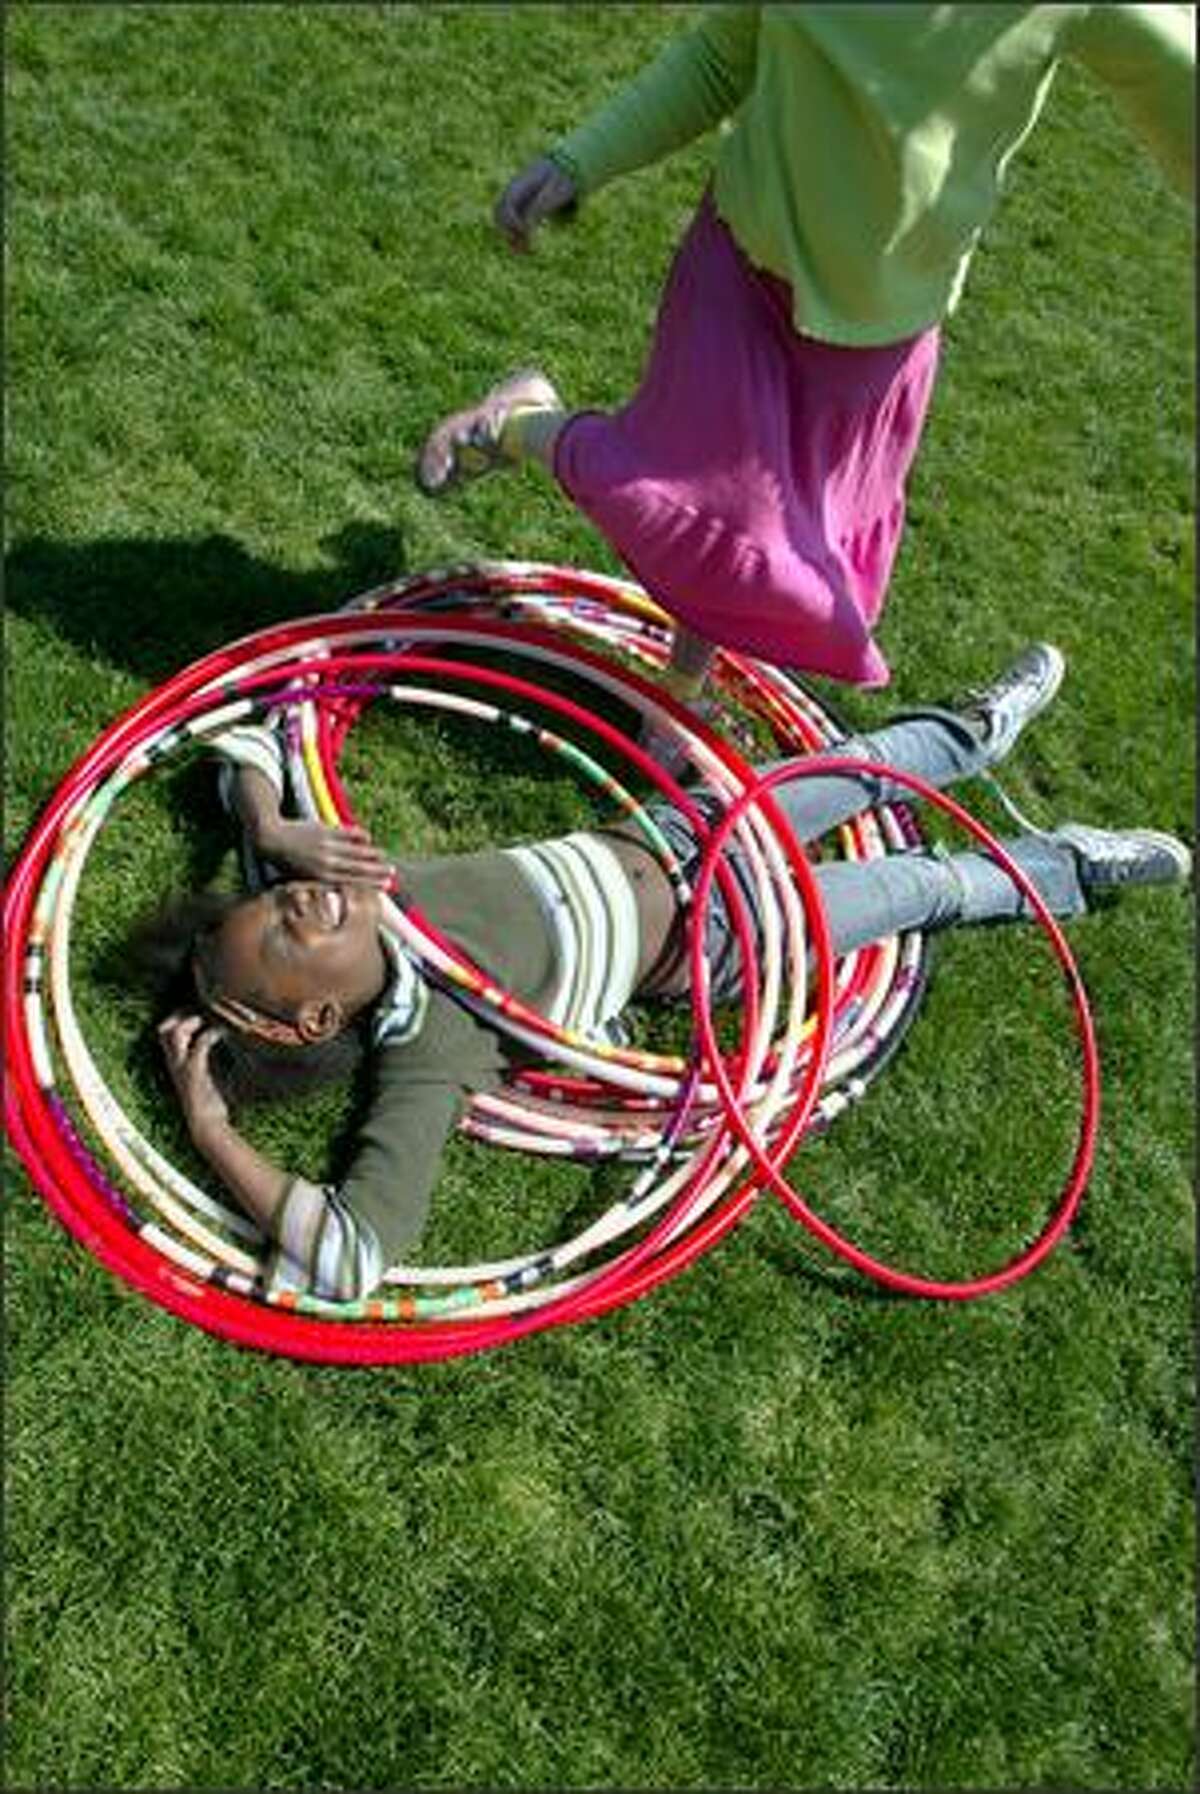 Nkechi Ogugua takes a break among the hula hoops as her friend Isabella Geist plays with them during the Seattle International Children's Festival at the Seattle Center. Both 8-year-olds are students at Daniel Bagley Elementary School. The festival runs through Saturday. For information: www.seattleinternational.org